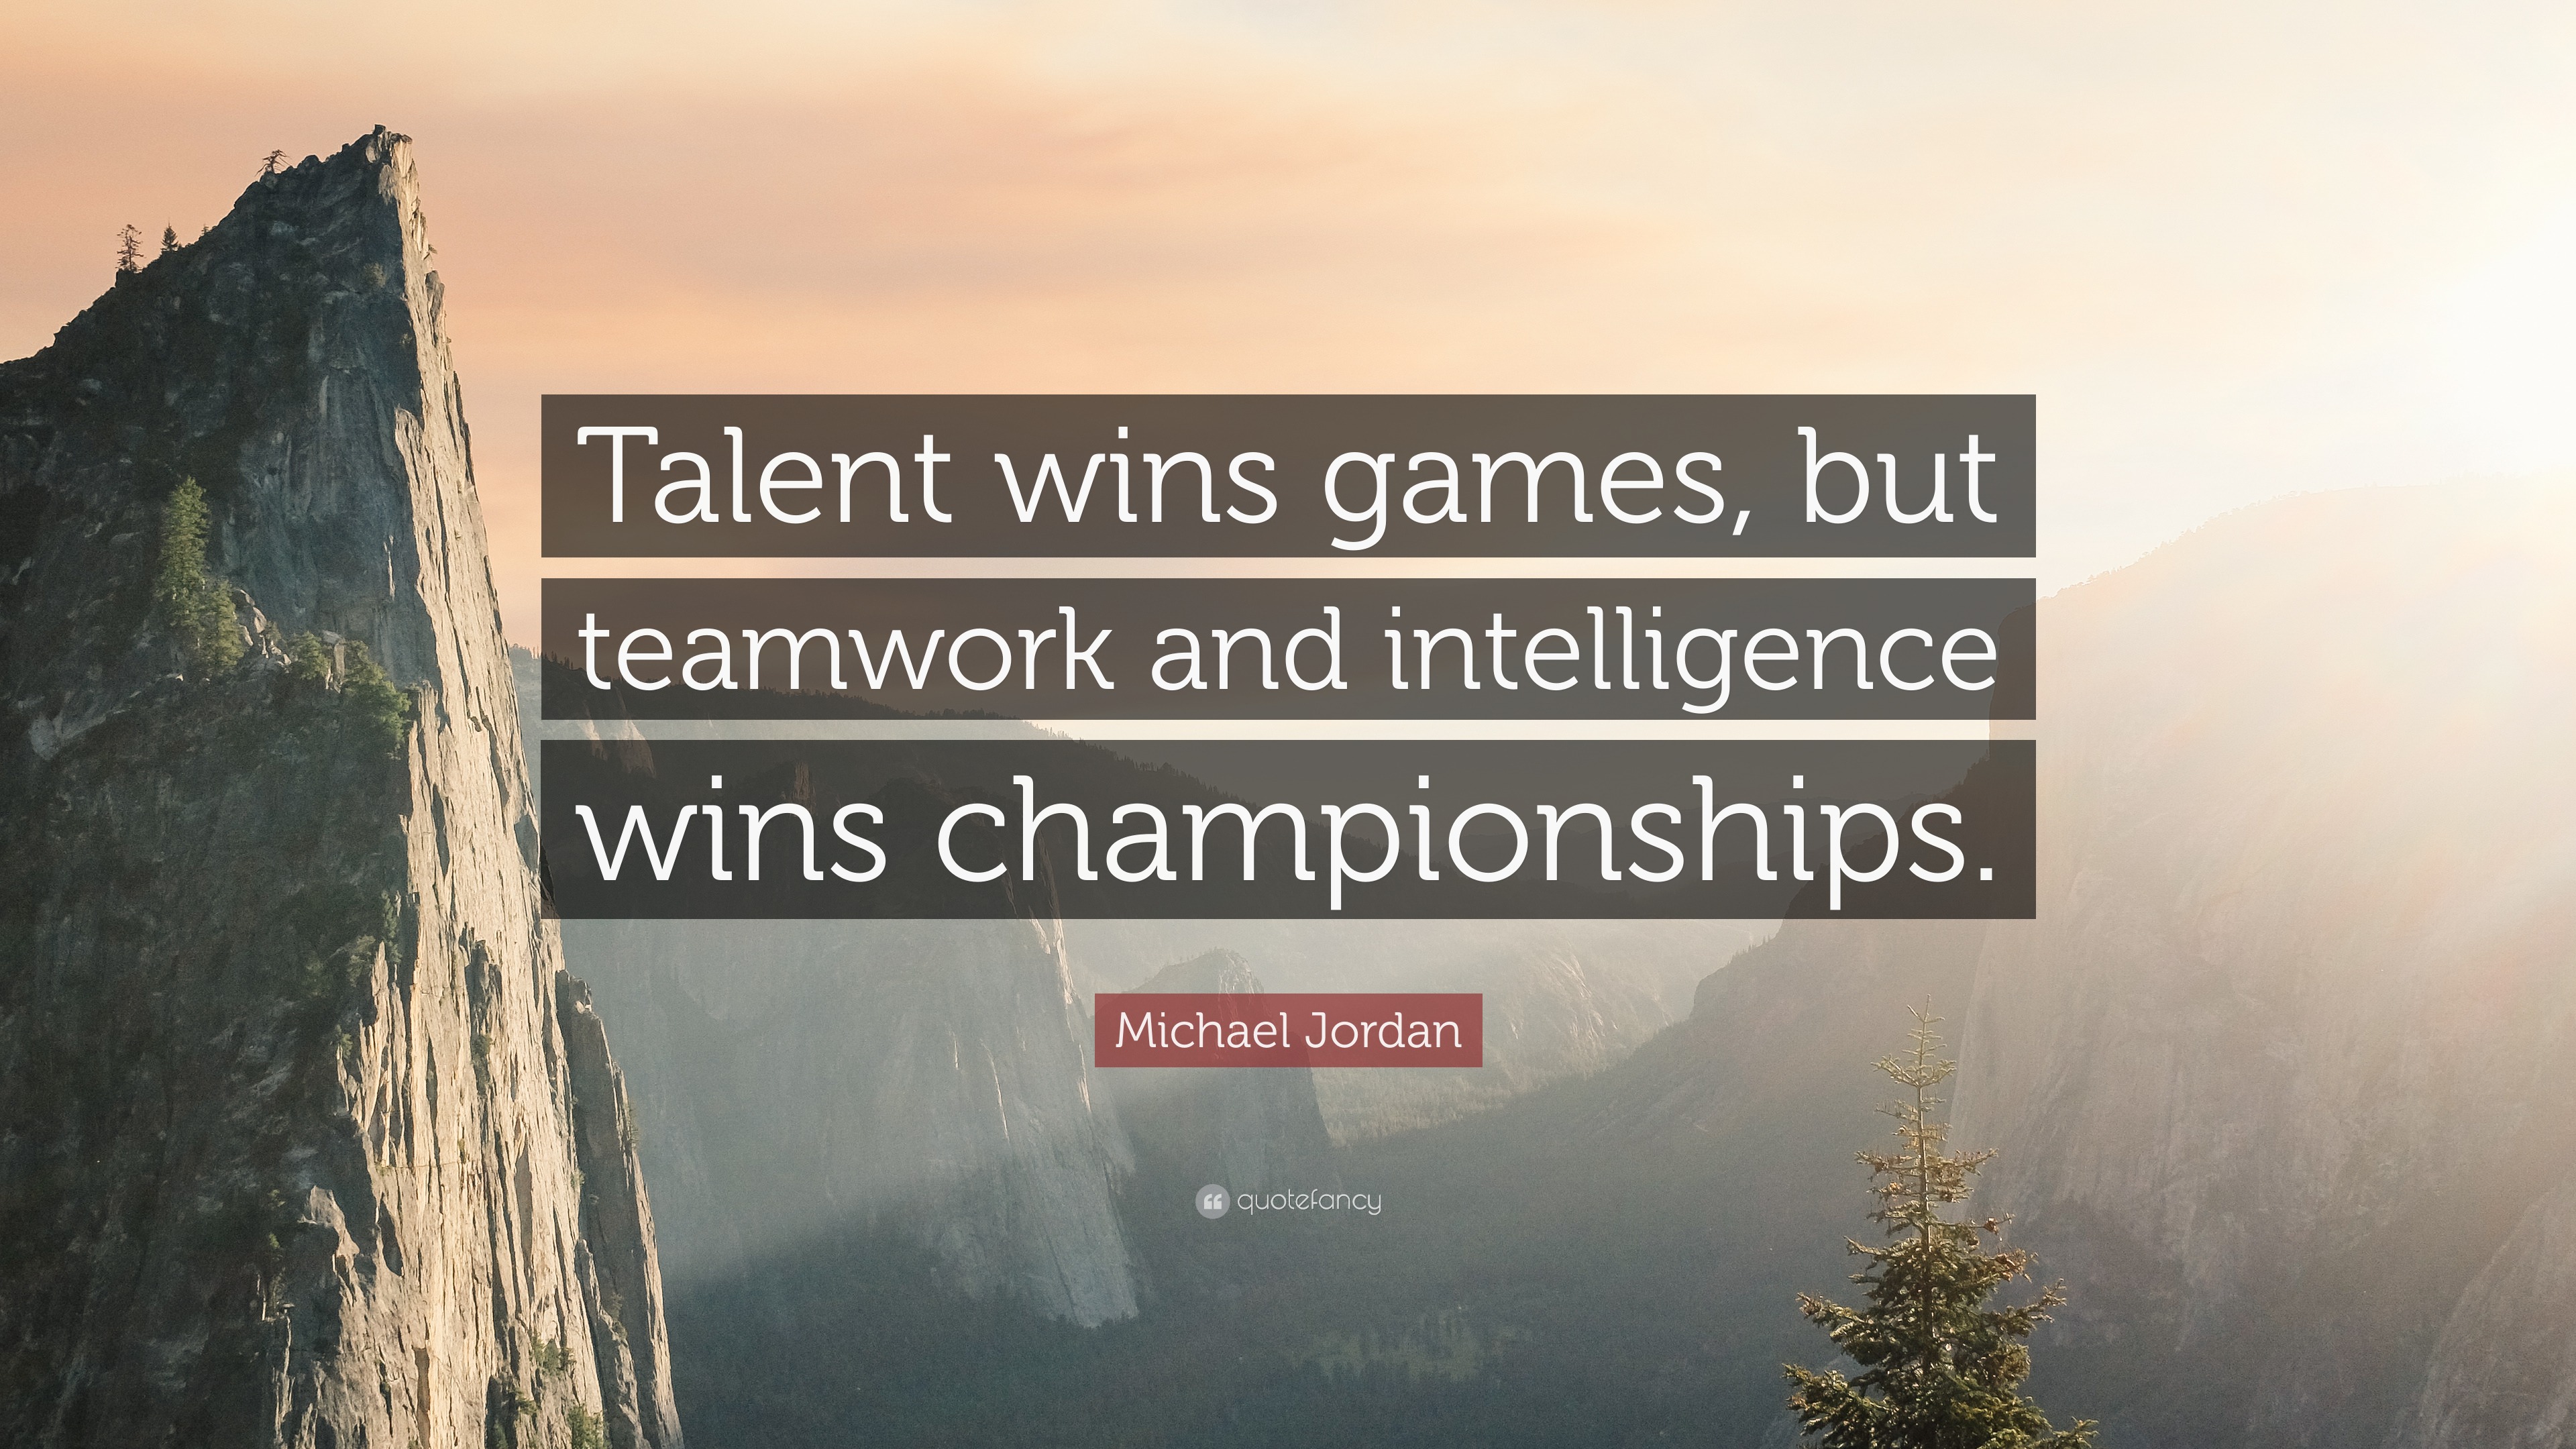 Michael Jordan Quote: “Talent wins games, but teamwork and intelligence ...